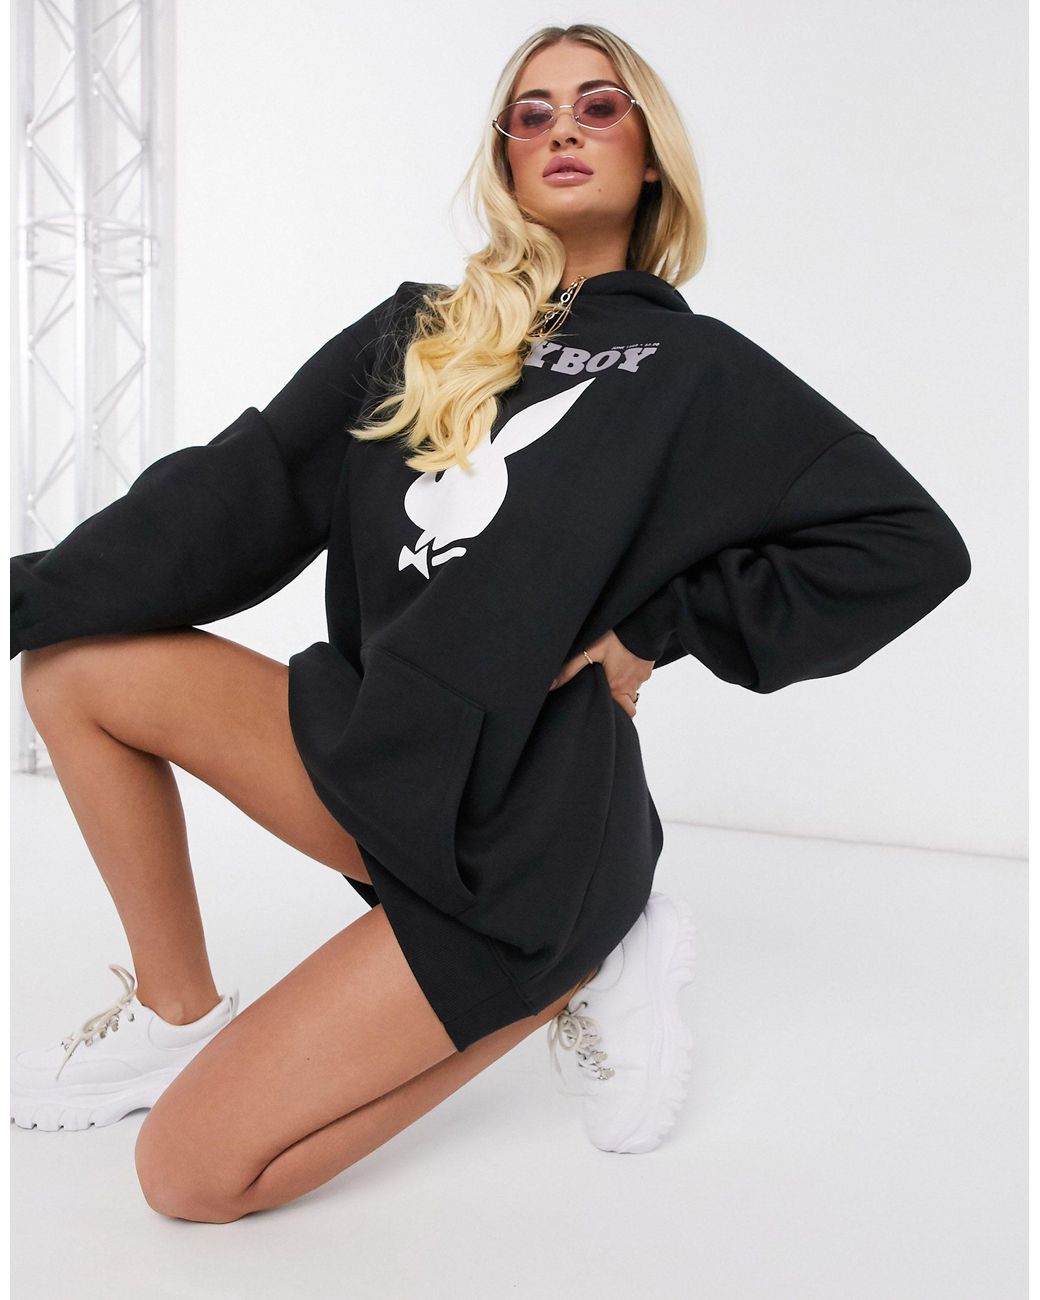 Missguided Playboy Bunny Graphic Hoodie Dress in Black | Lyst